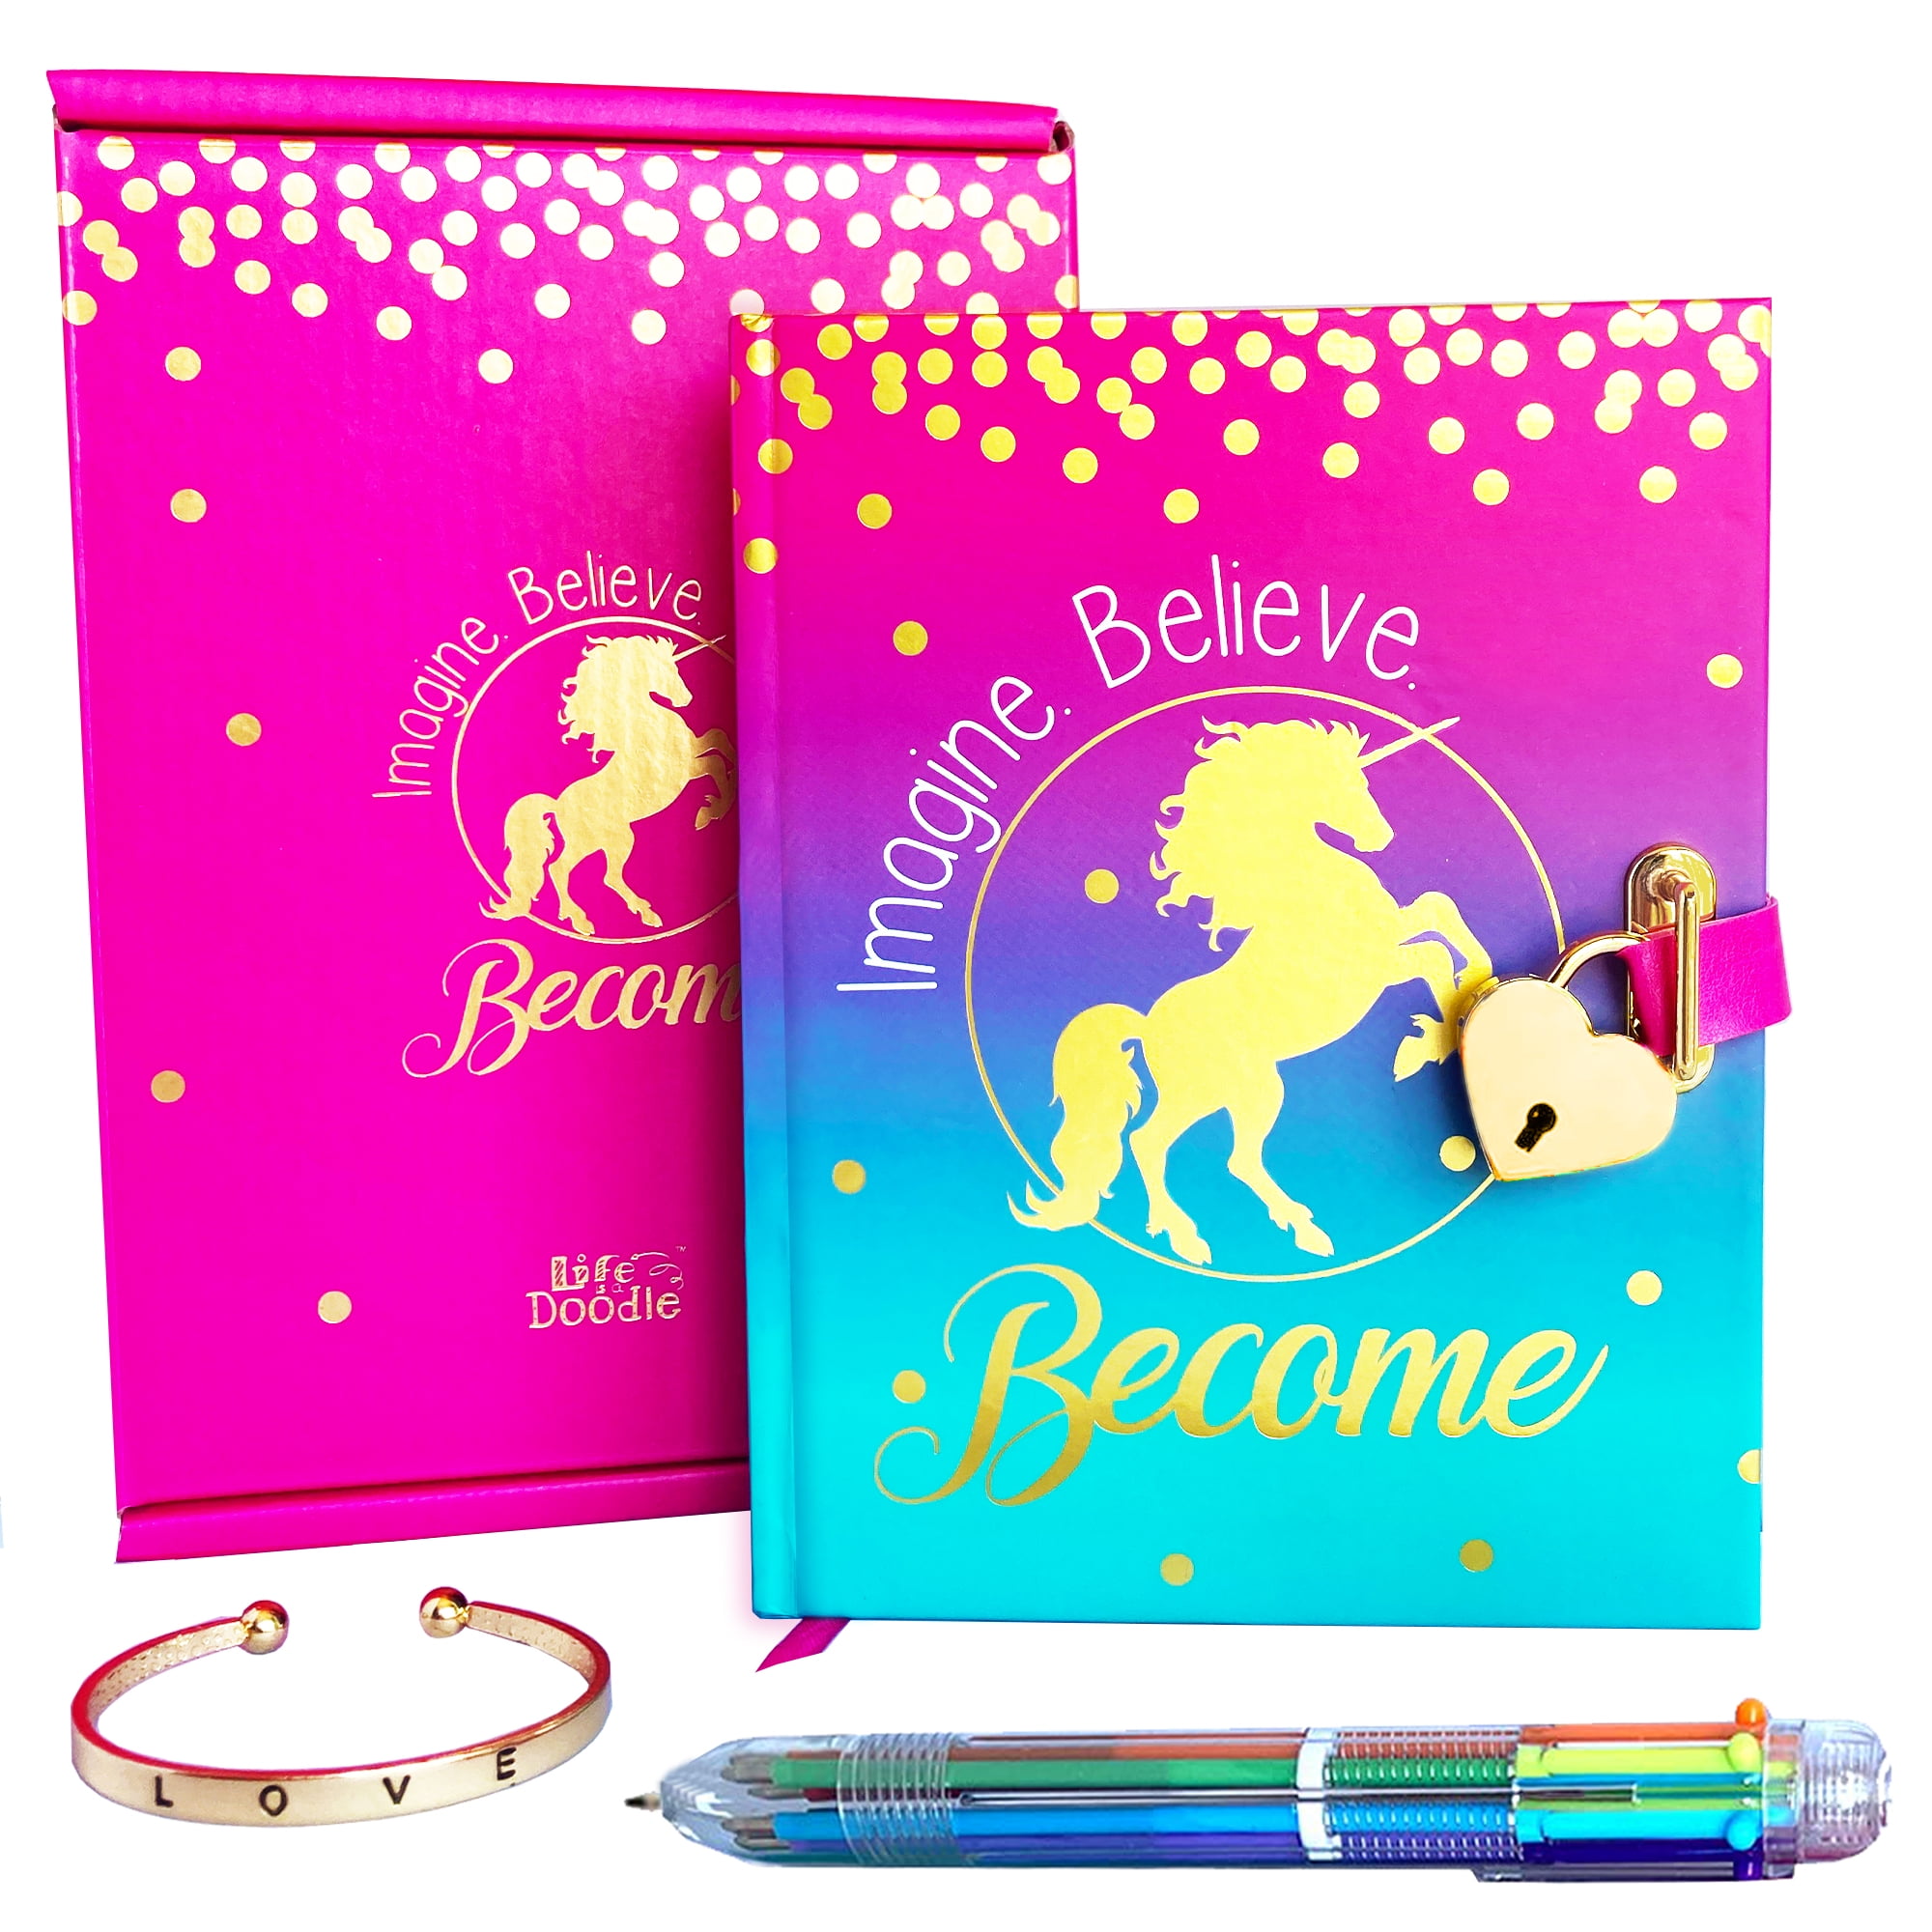 Unicorn for Girls Age 5 6 7 8 9 10 Years Old Monet Studios Childrens Kids Secret Diary Journal Notebook Pen Set with Lock and Key Unicorn Theme 